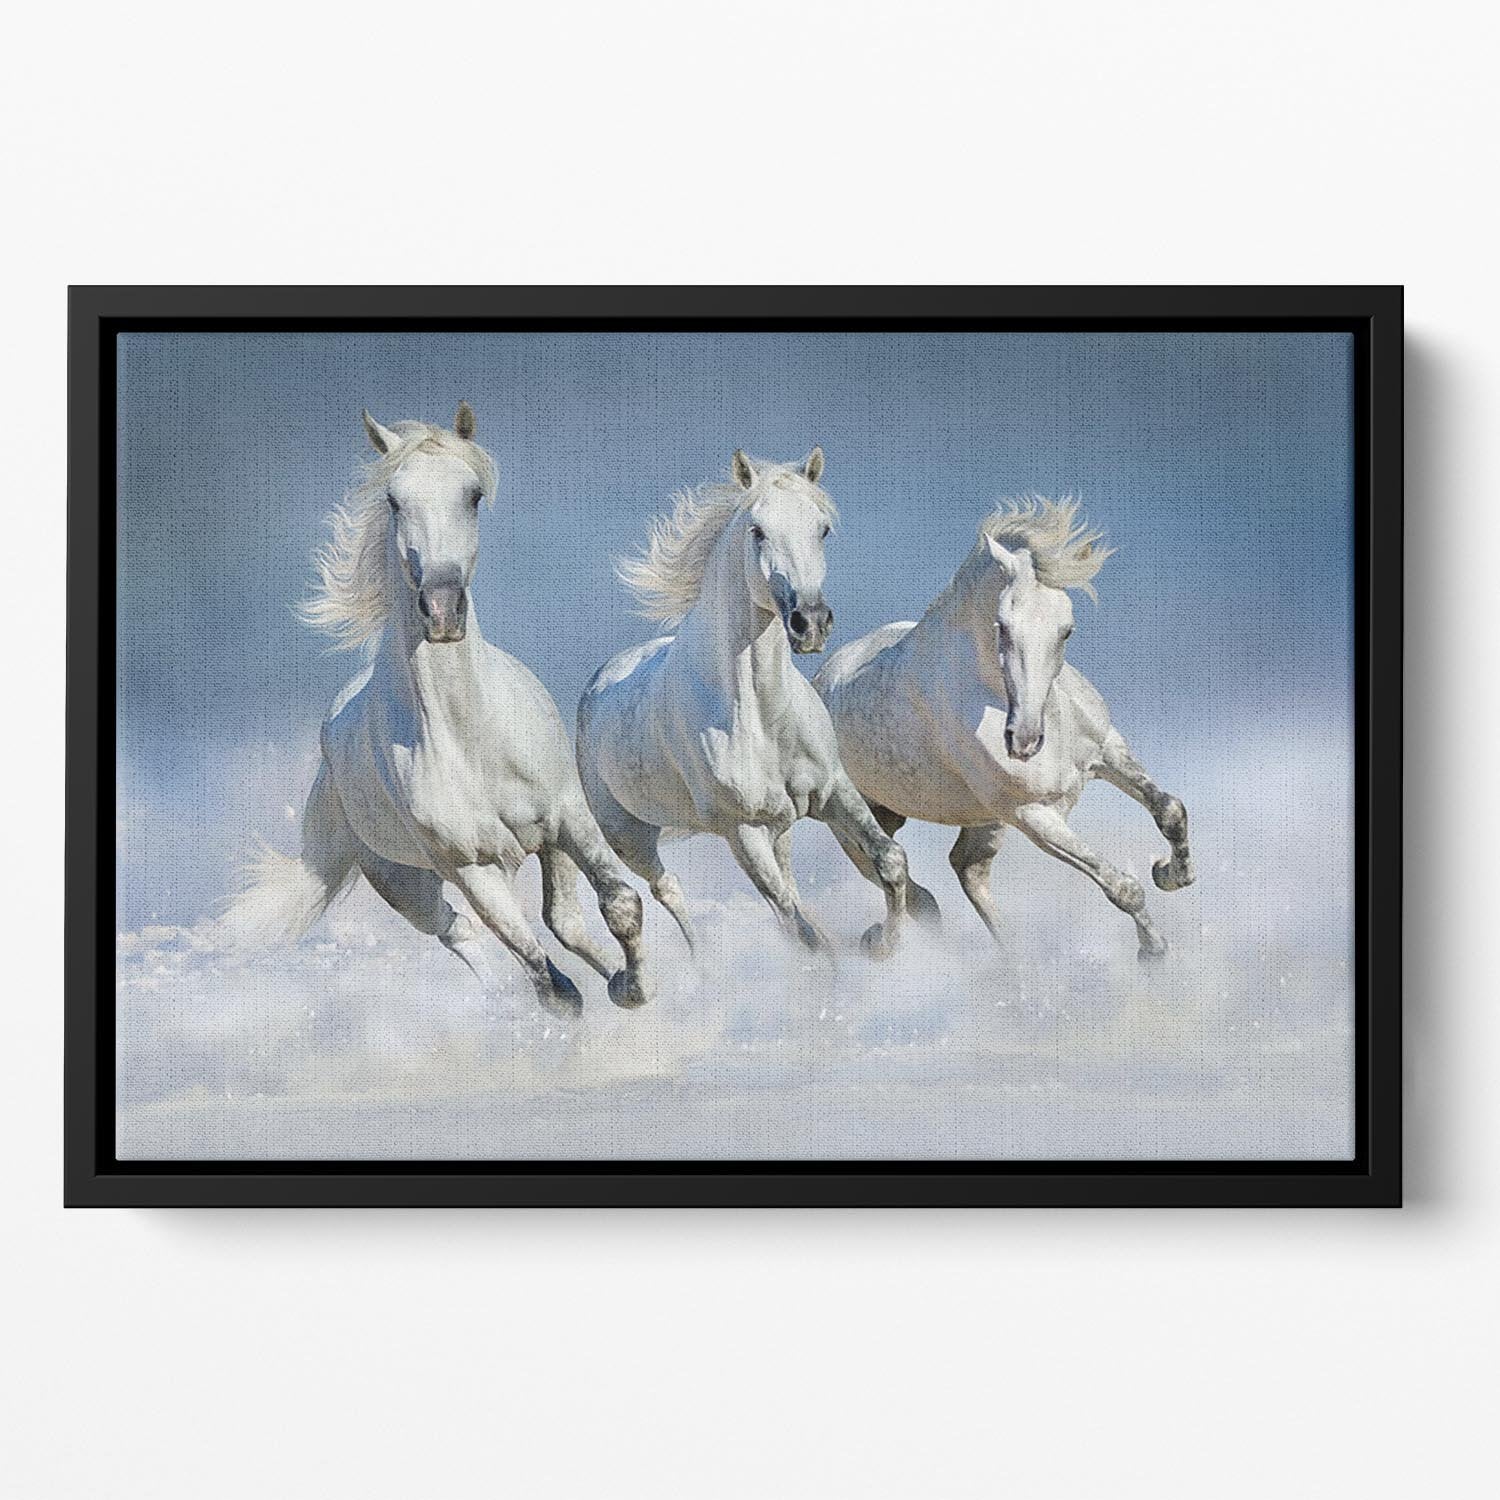 Three white horse run gallop in snow Floating Framed Canvas - Canvas Art Rocks - 2